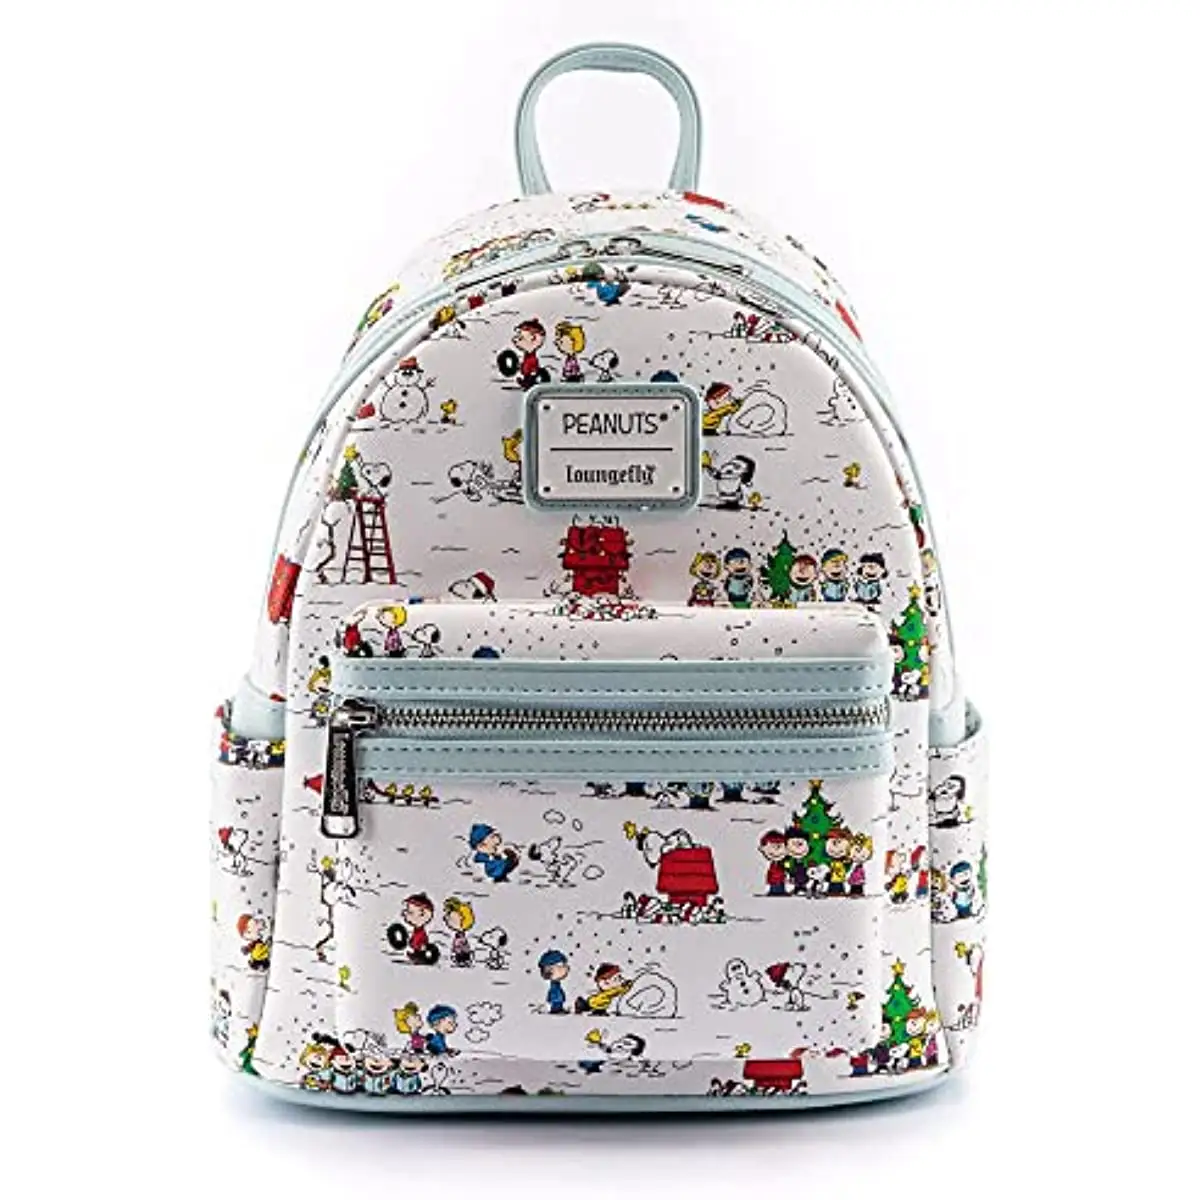 Loungefly Happy Holidays Mini Backpack student stationary school bag